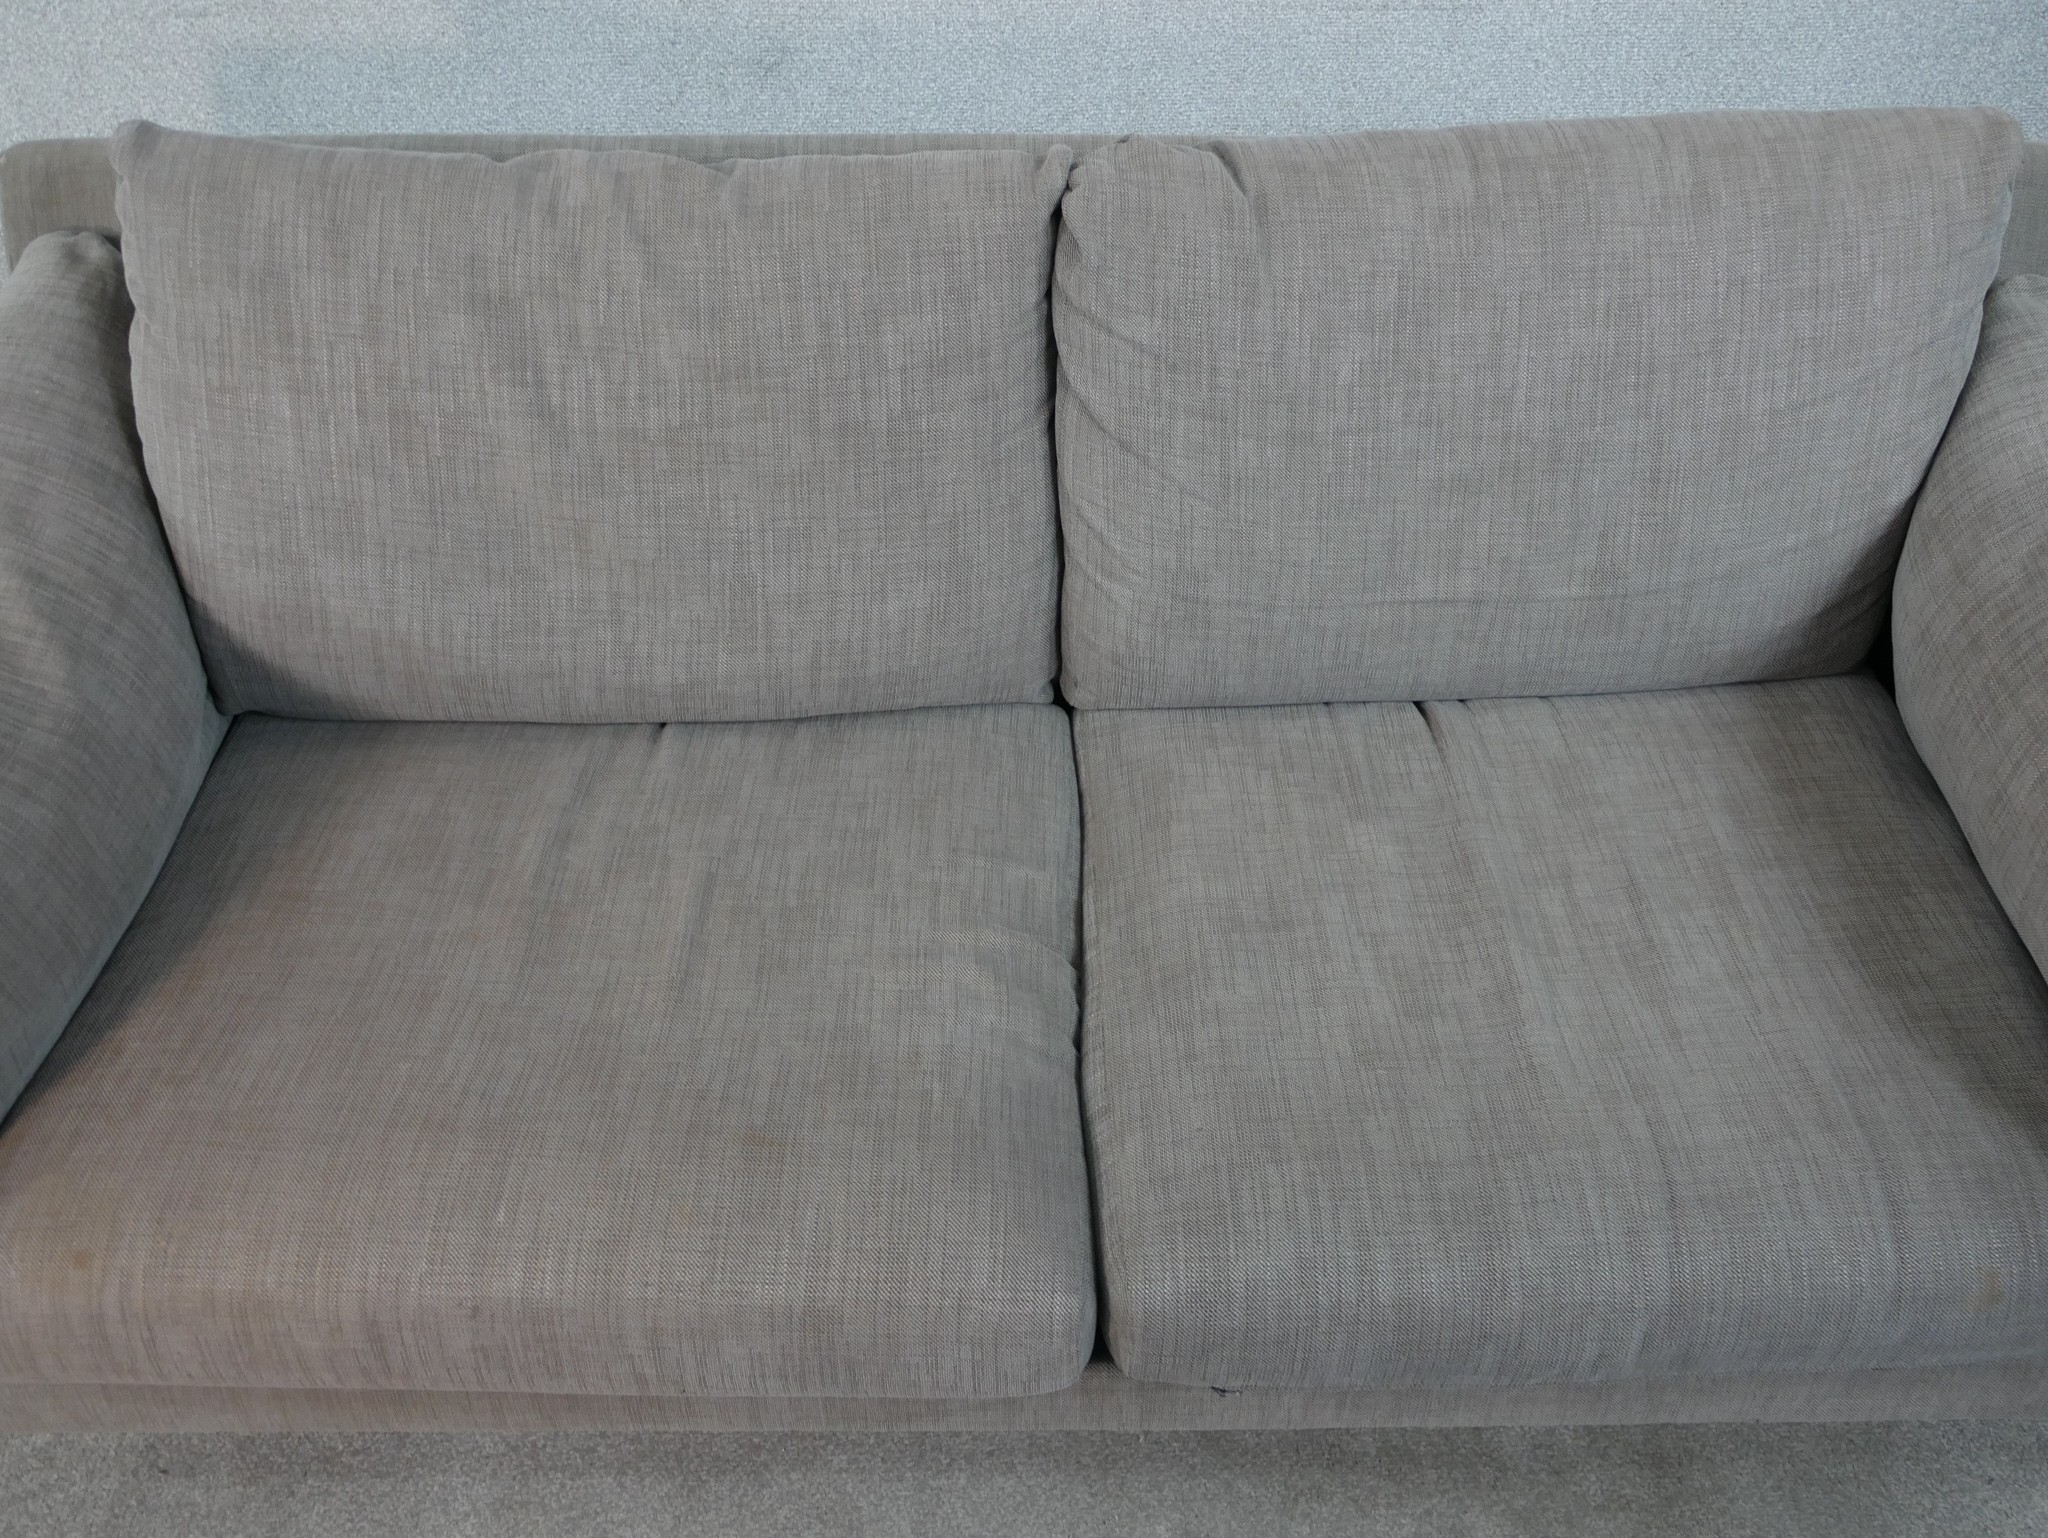 A John Lewis two seater sofa, upholstered in grey fabric, with oak arms and legs. H.77 W.192 D.88cm - Image 6 of 8